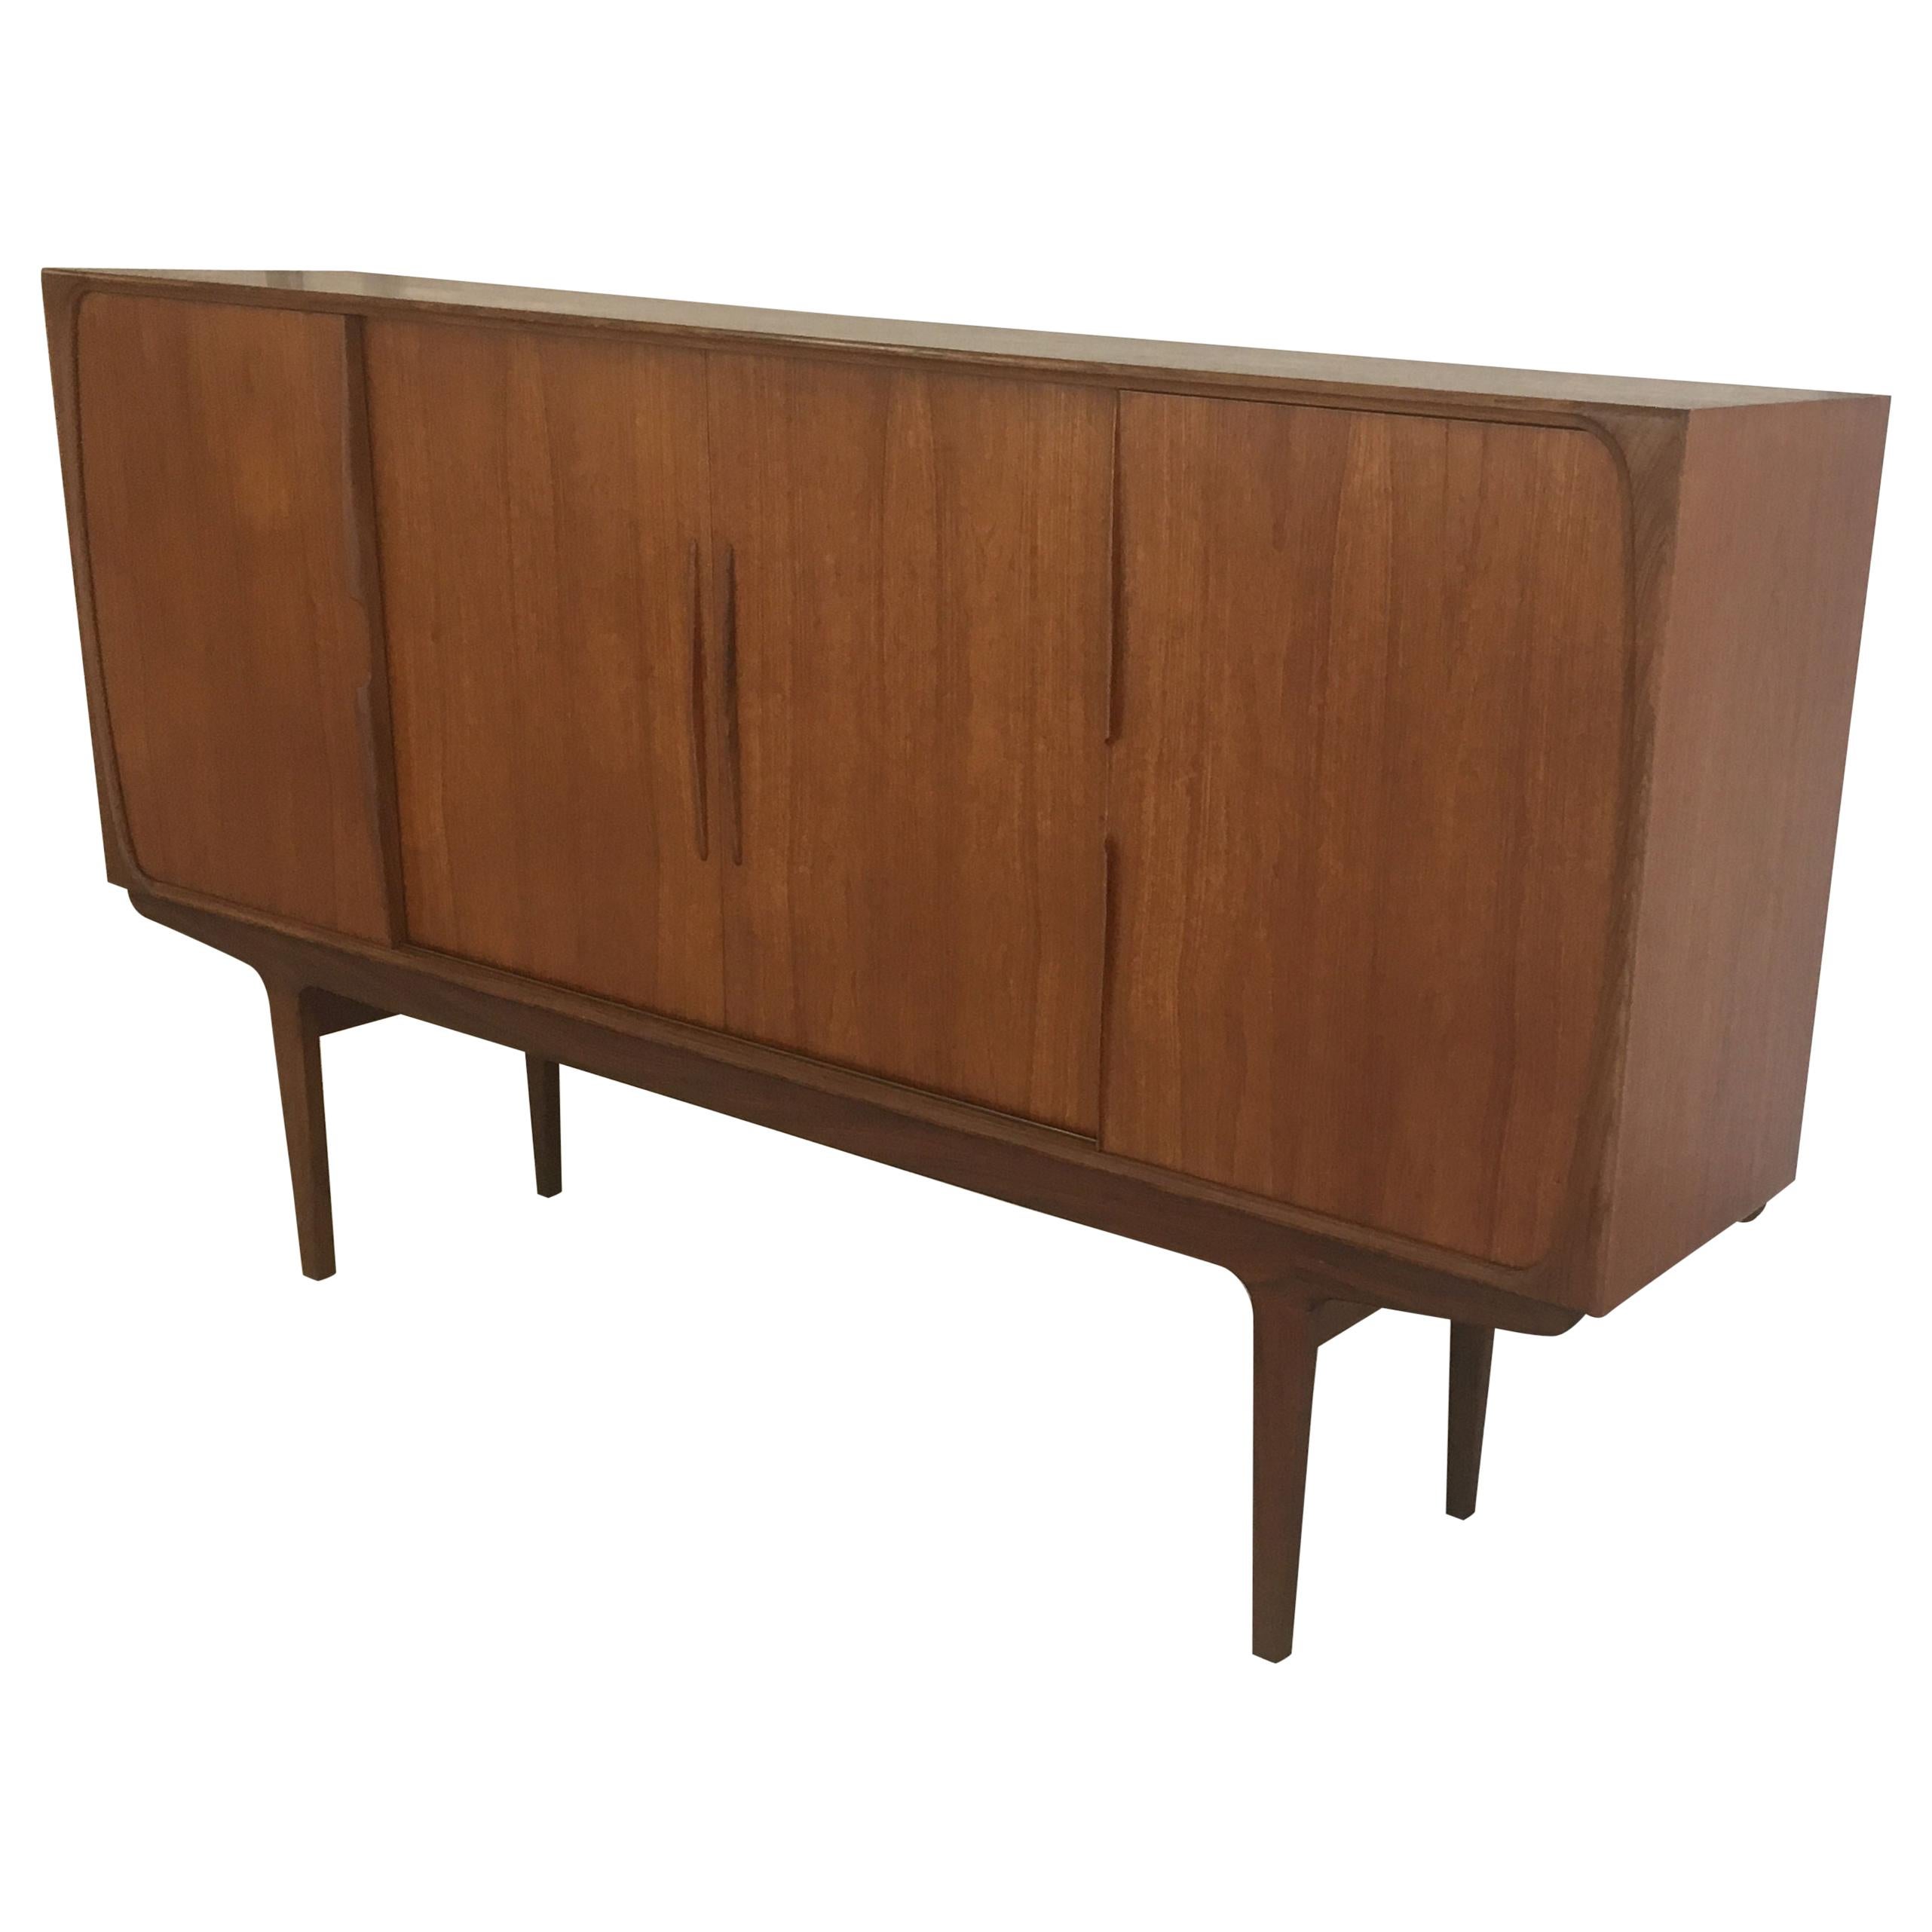 Refinished Danish 1960s Sideboard in Teak with Integrated Bar Section